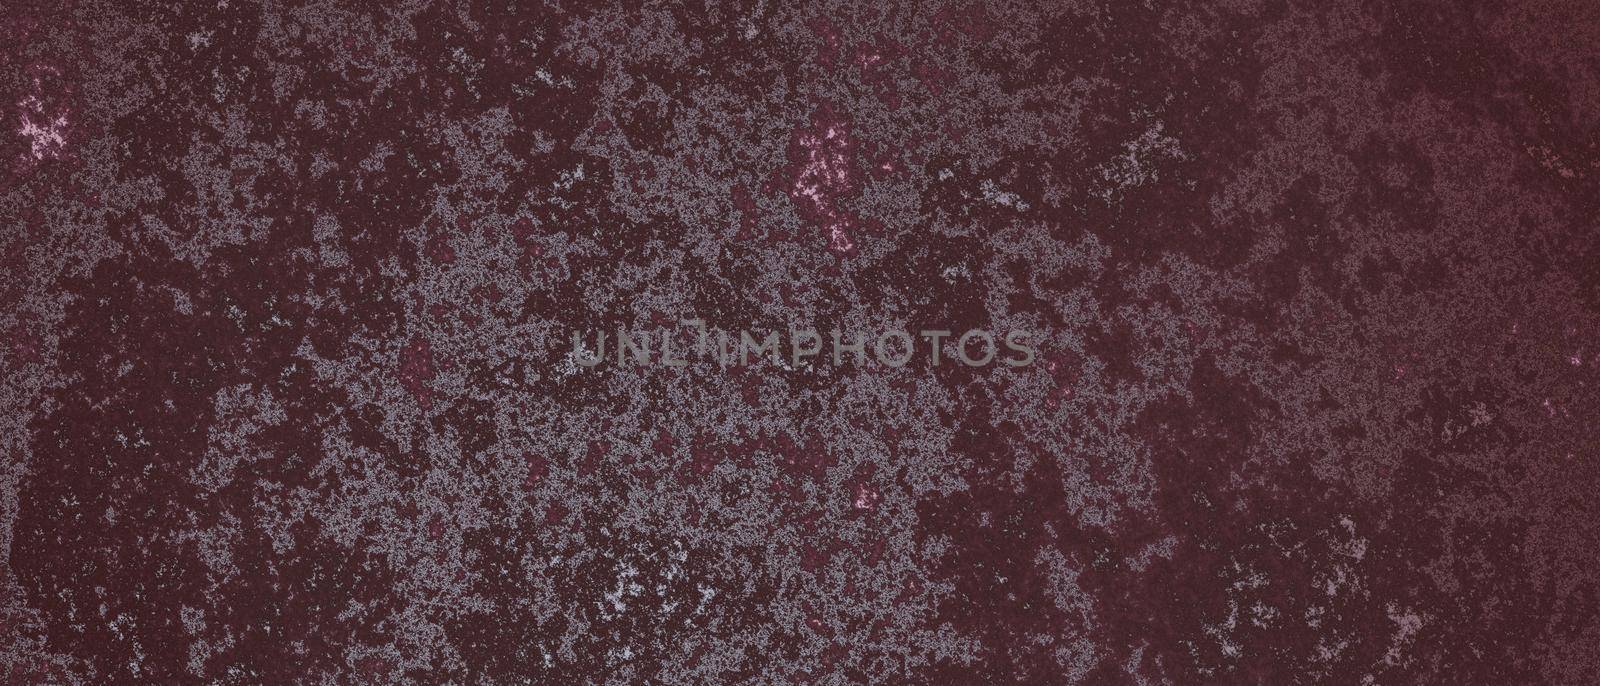 Rich red background texture, marbled stone or rock textured banner elegant holiday color and design